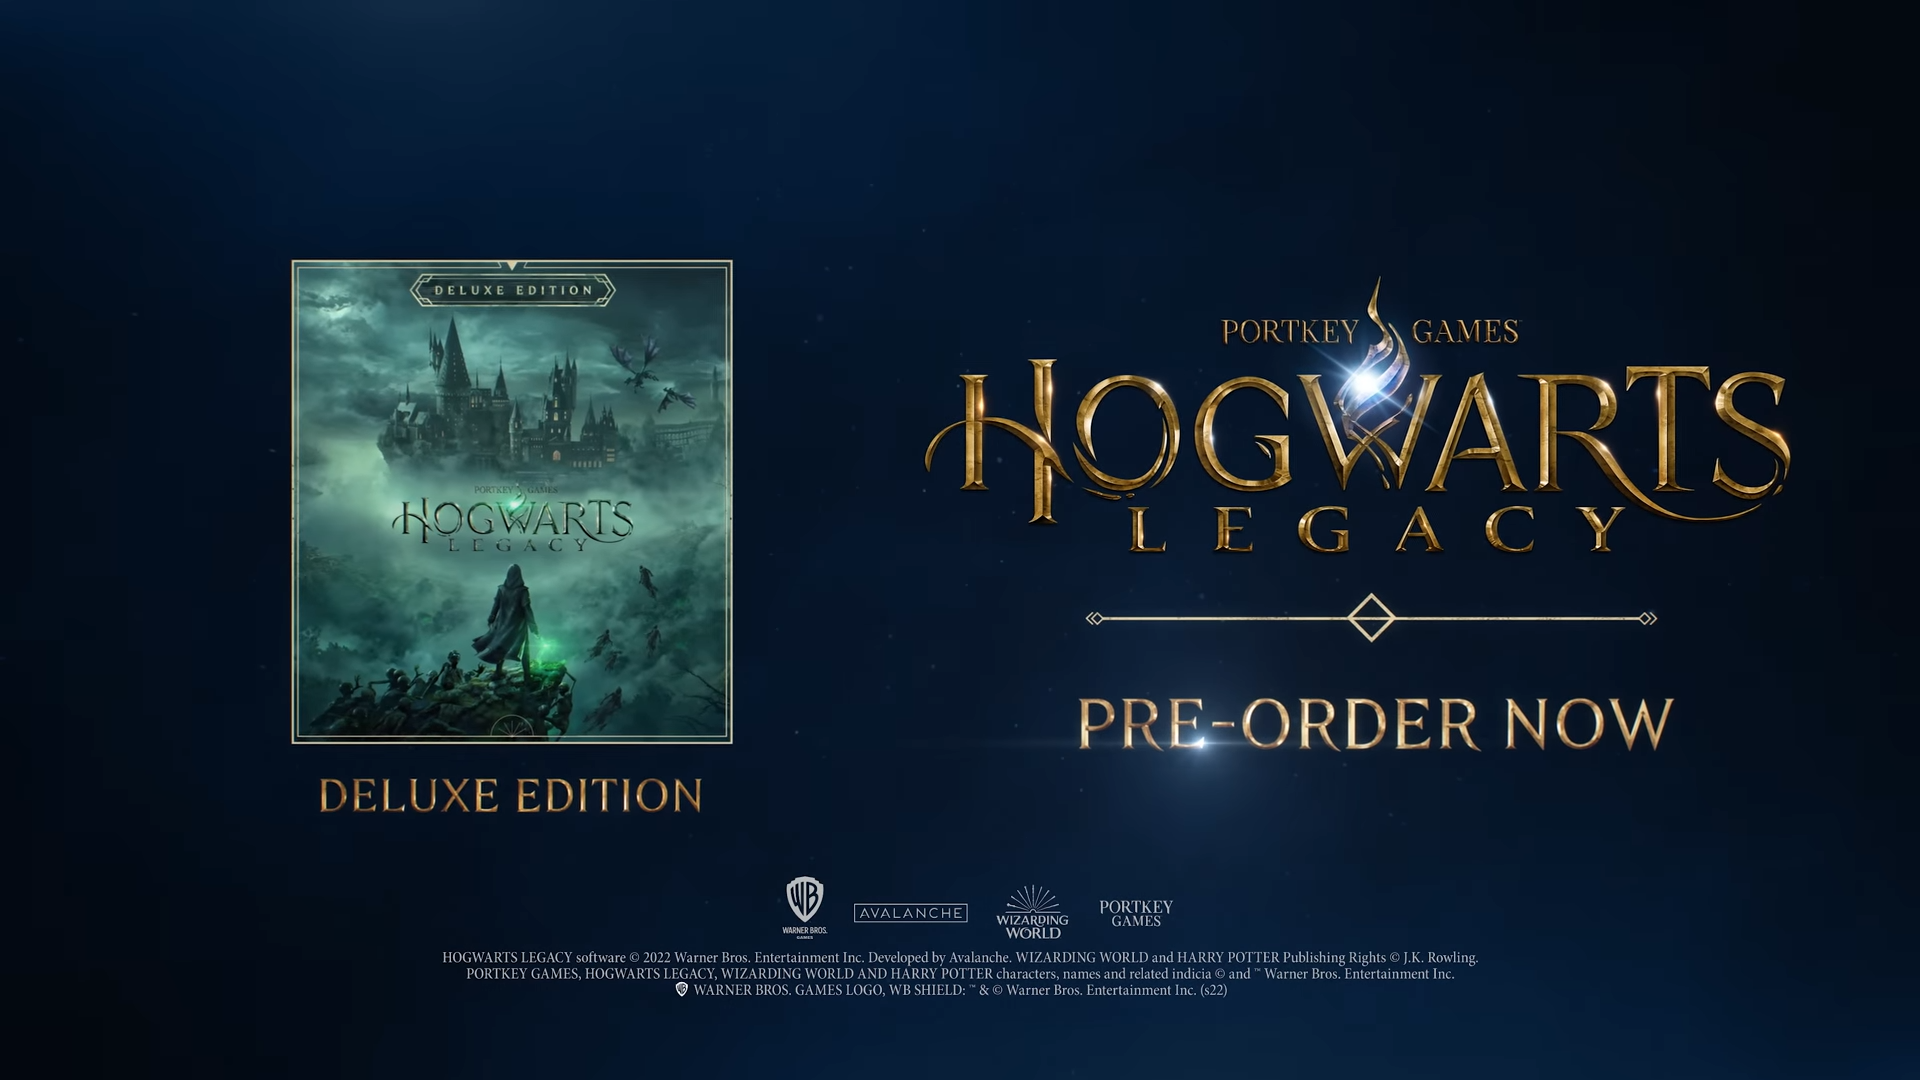 Hogwarts Legacy gameplay showcase What you probably missed - Pre-order